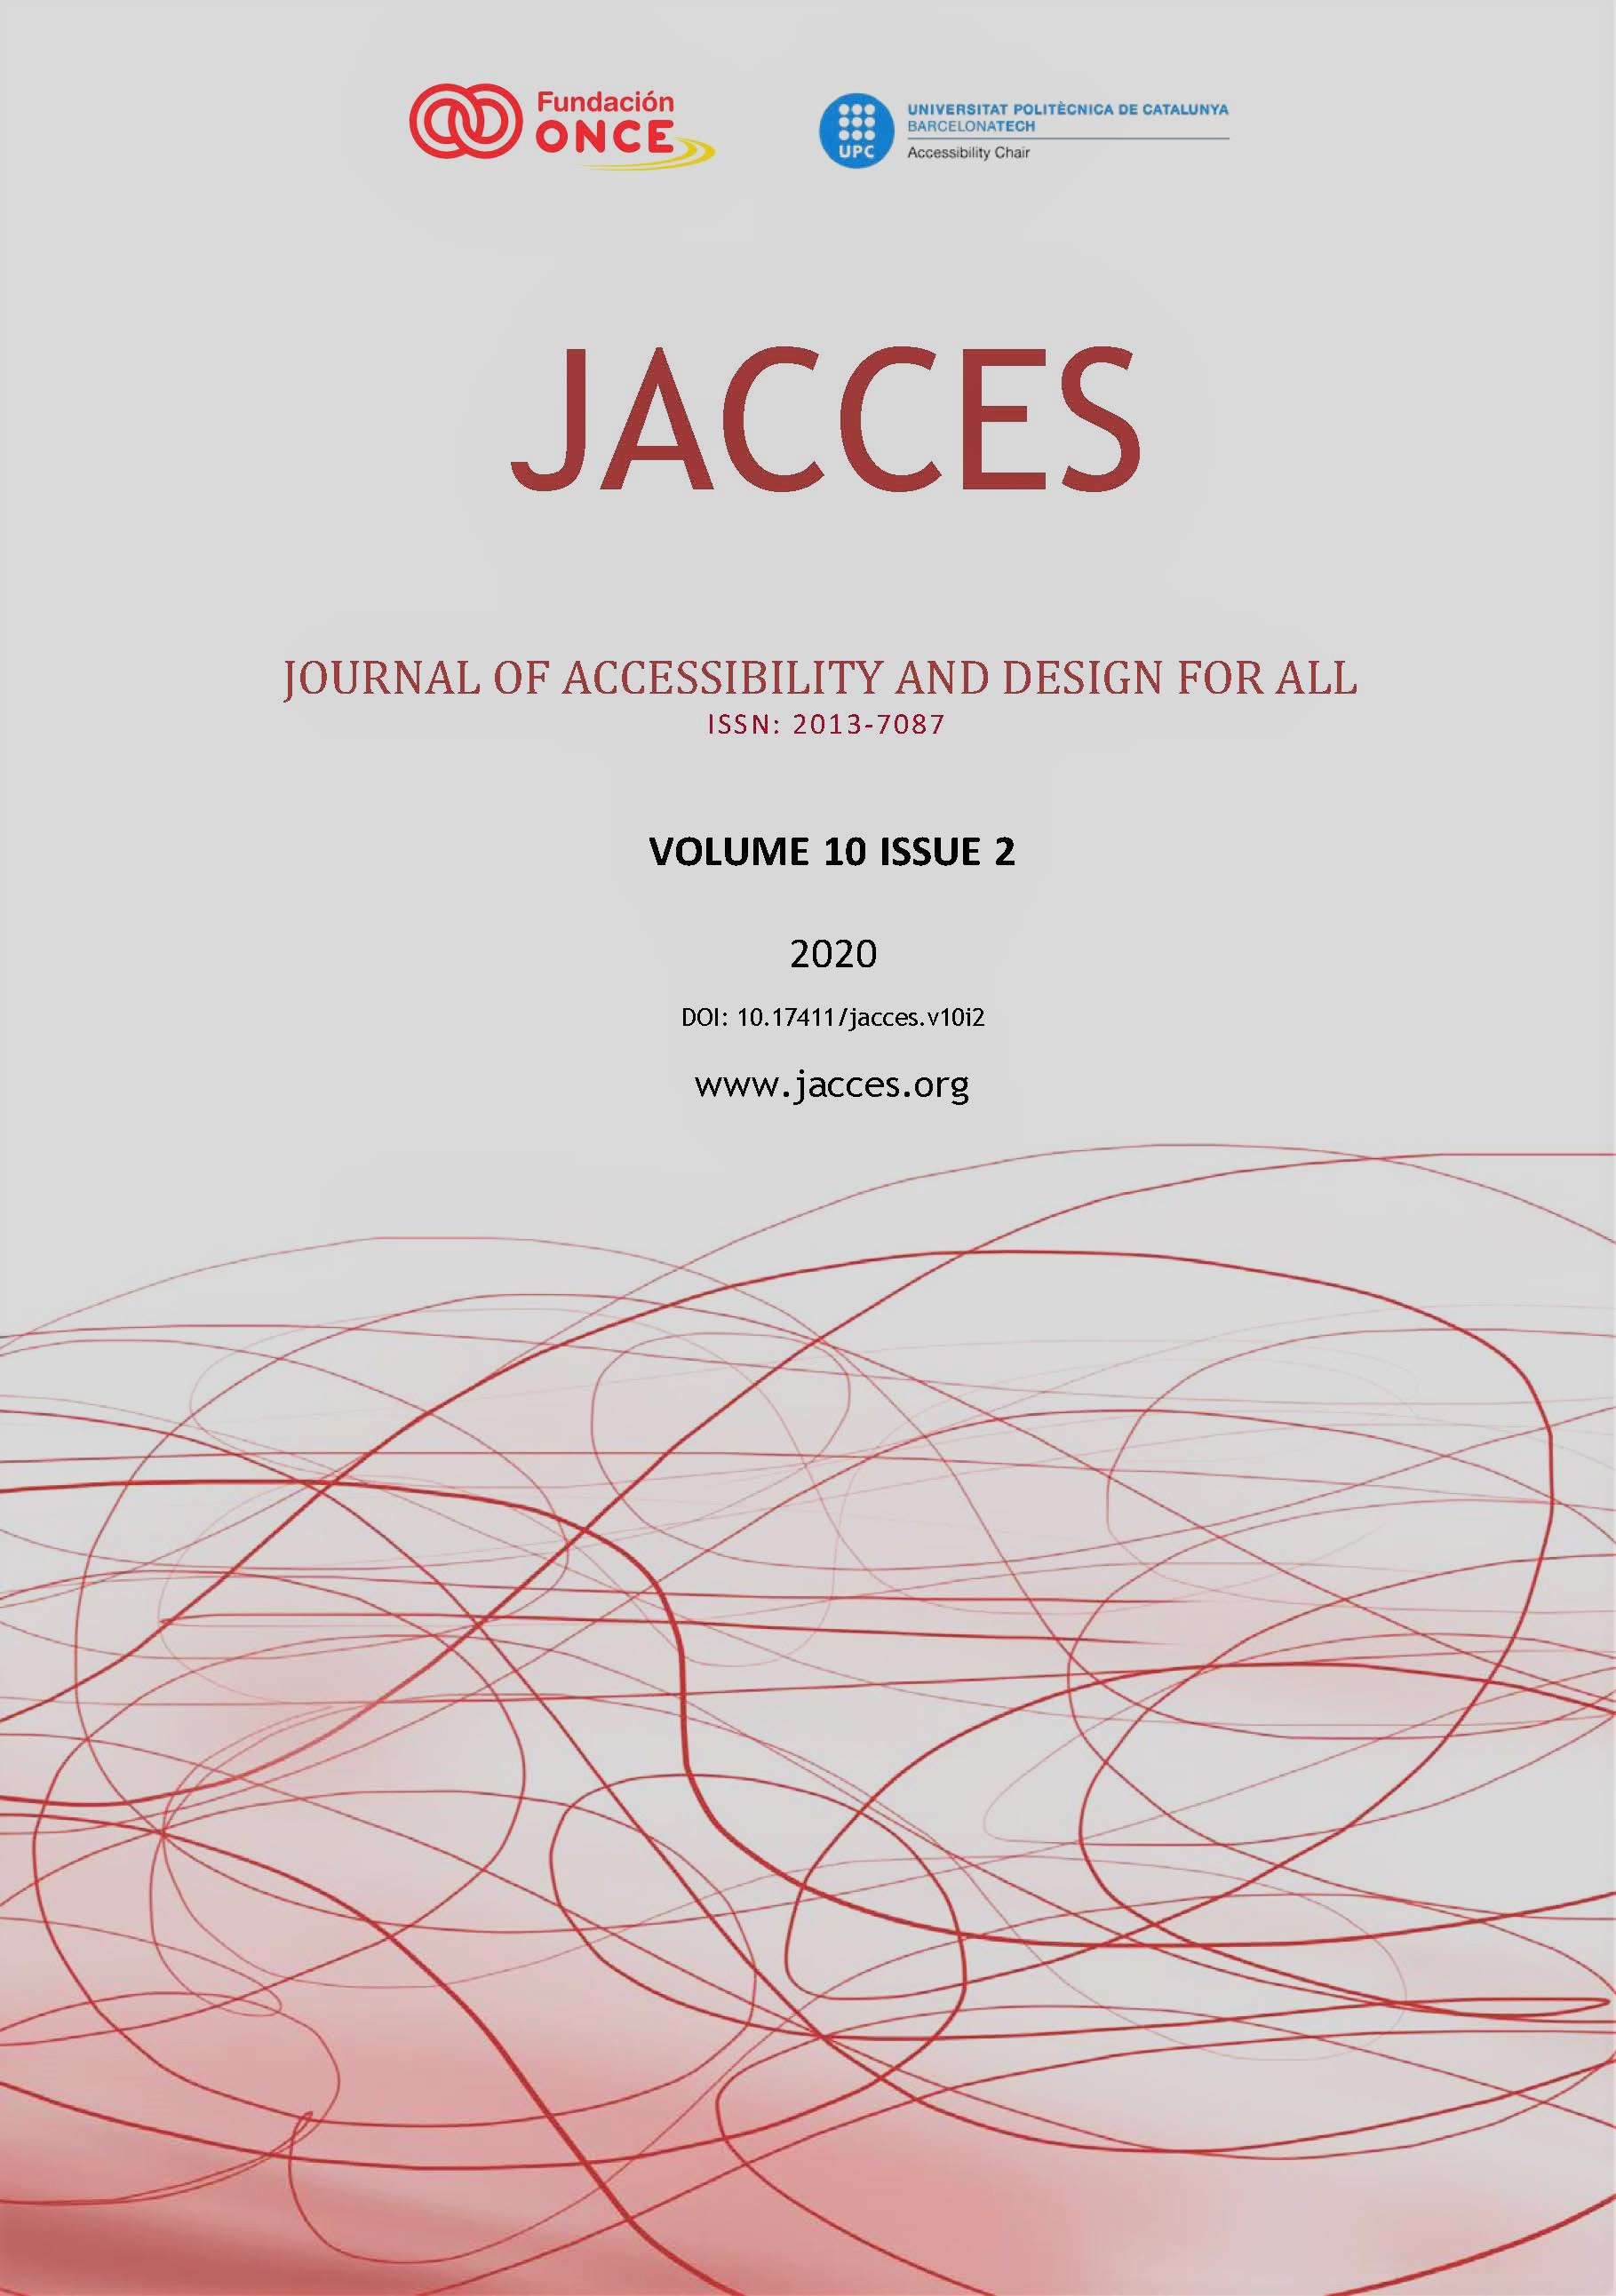 Cover of Journal of Accessibility and Design for All Vol. 10 No. 2 (2020)